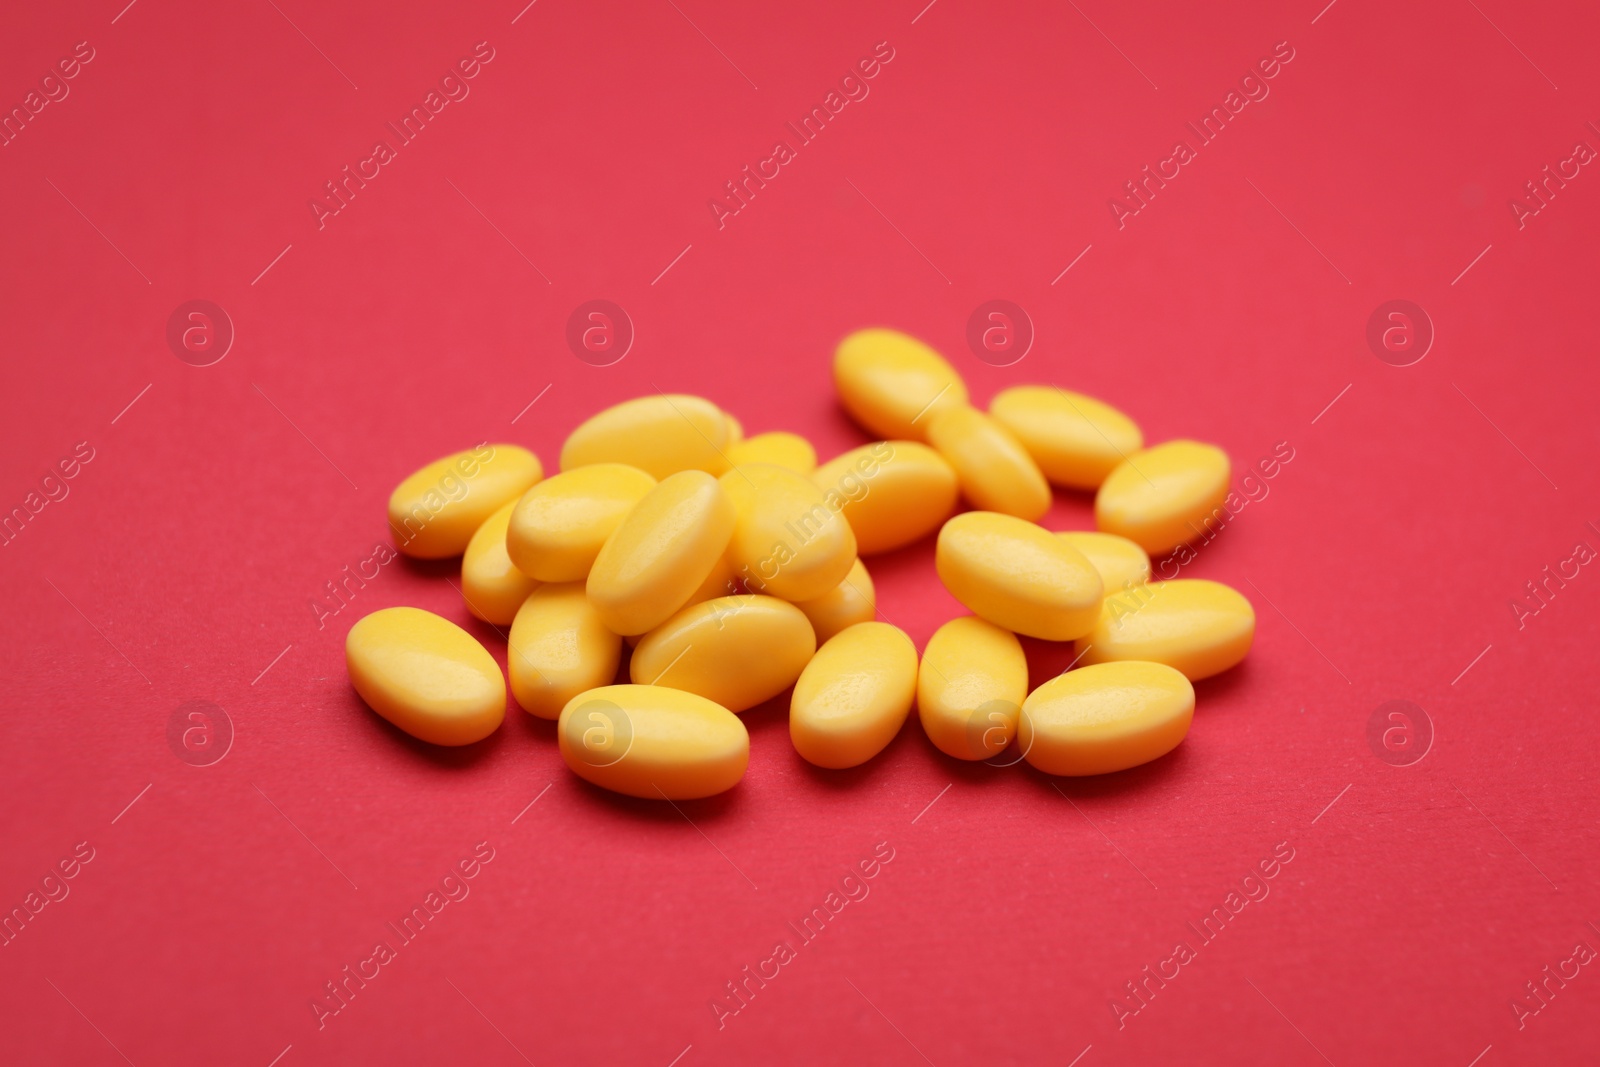 Photo of Many yellow dragee candies on red background